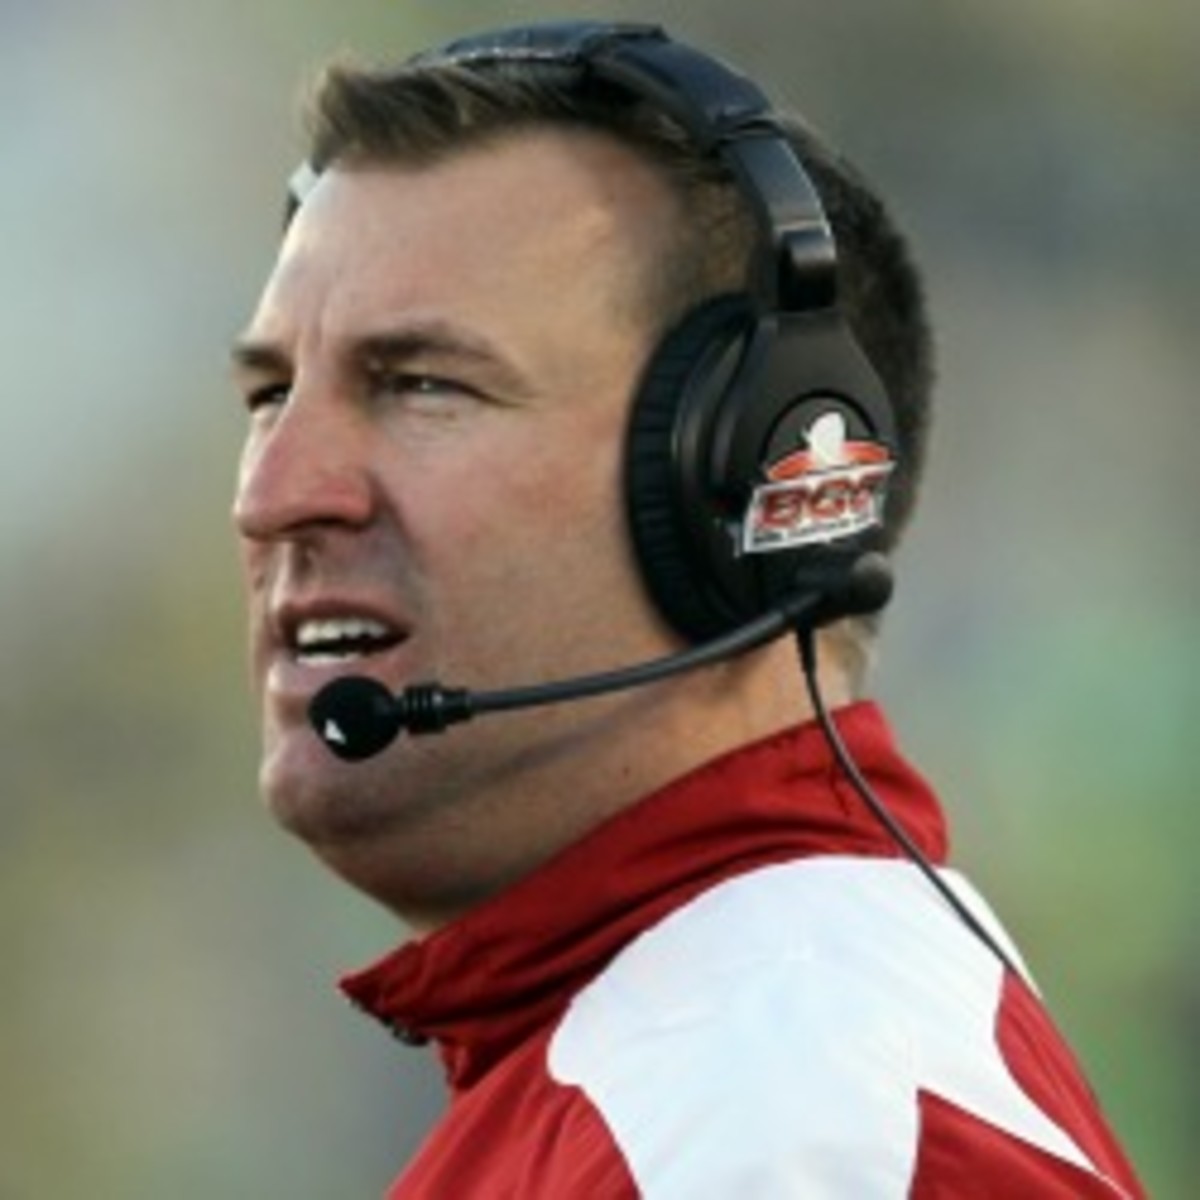 Bret Bielema has led Wisconsin to a 68-24 record over the past seven seasons. (Stephen Dunn/Getty Images)